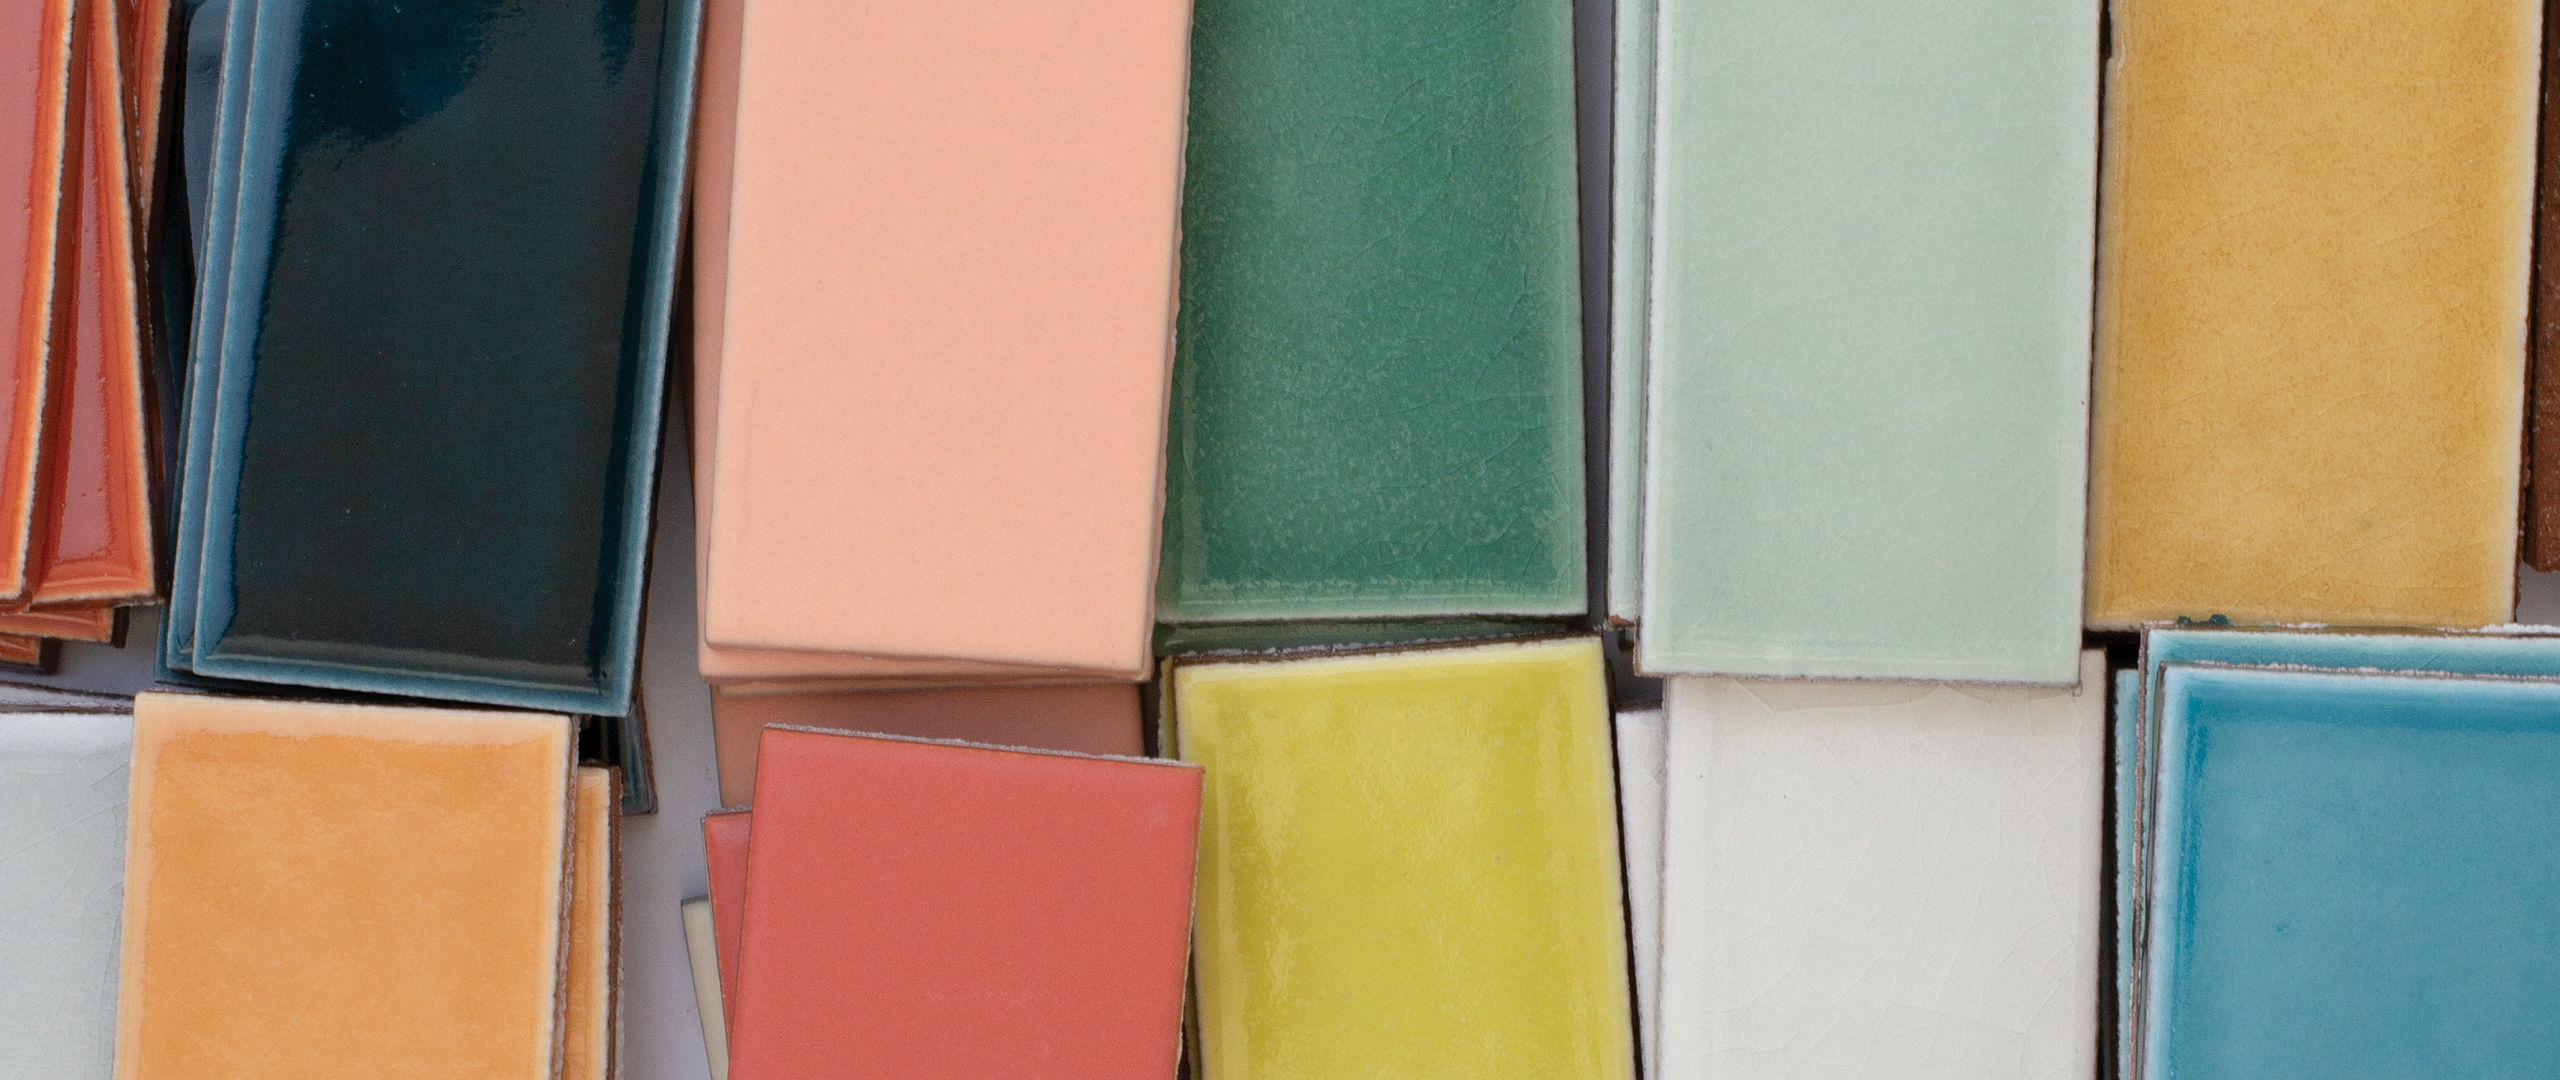 Fireclay tiles in various colors.